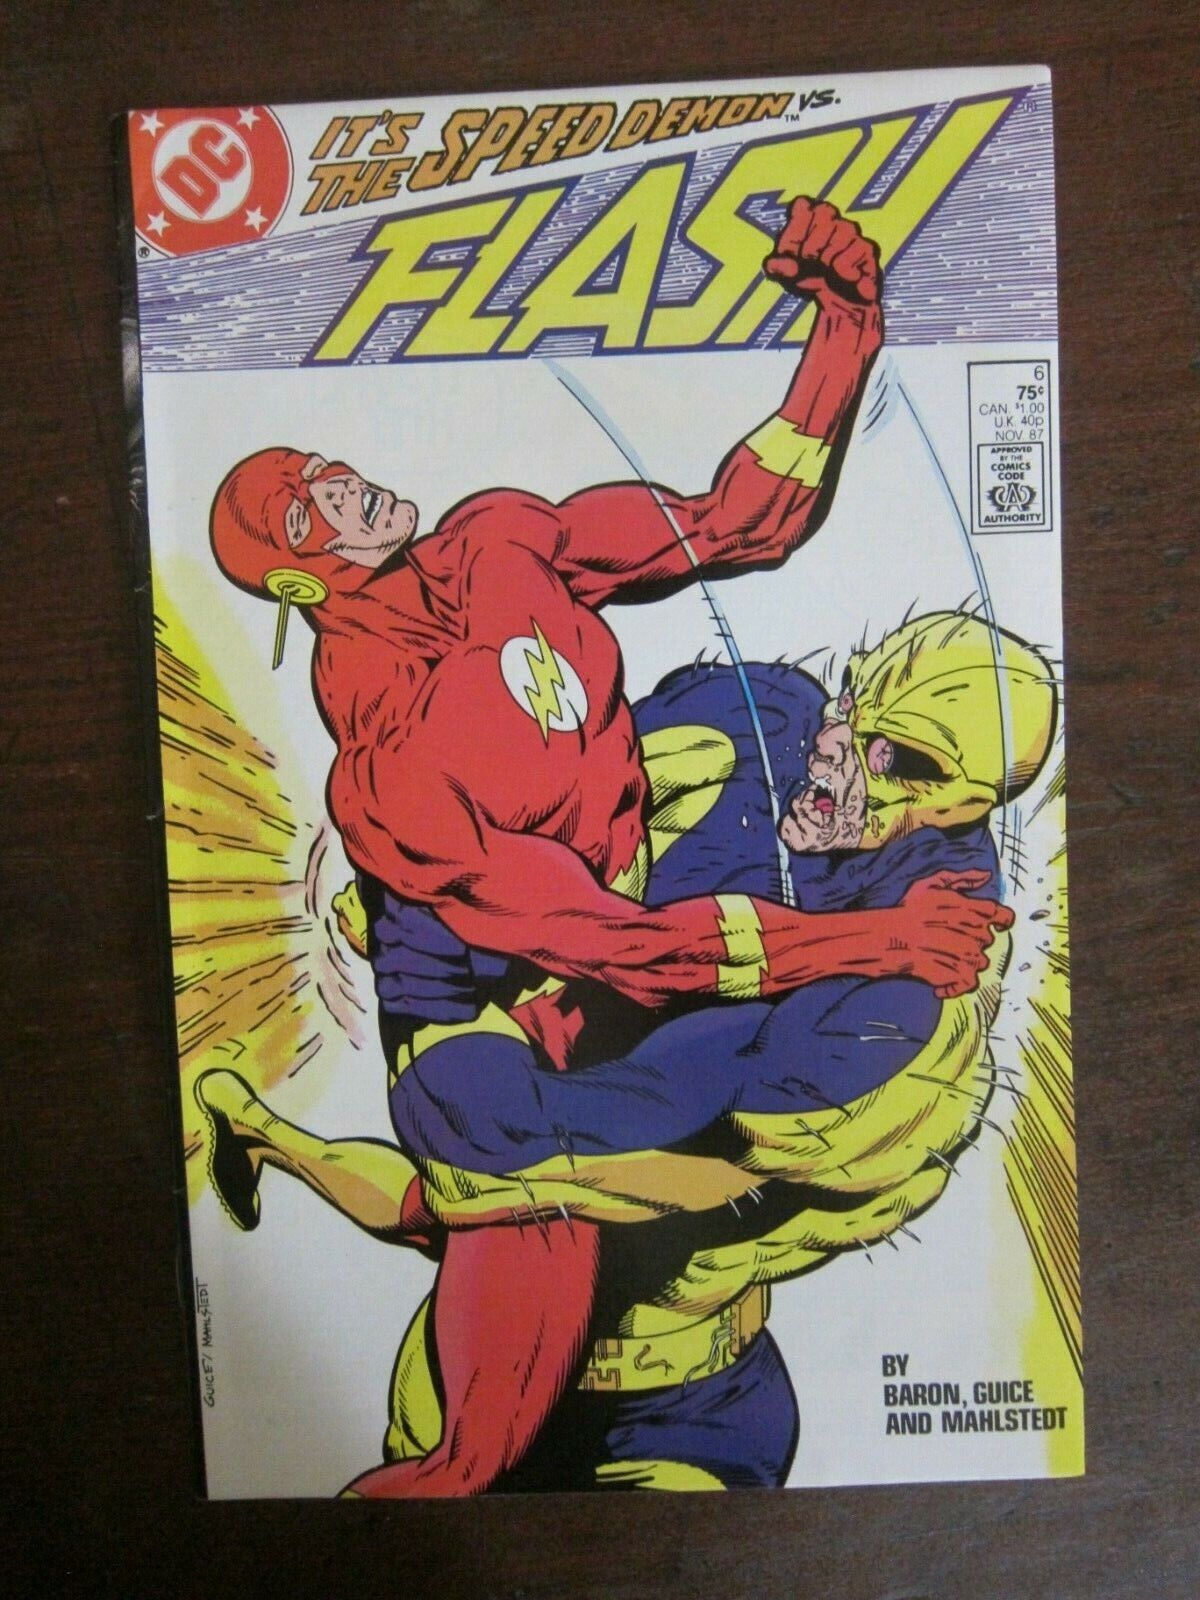 Flash #6 - second series - Speed Demon - domestic violence story - Jackson Guice